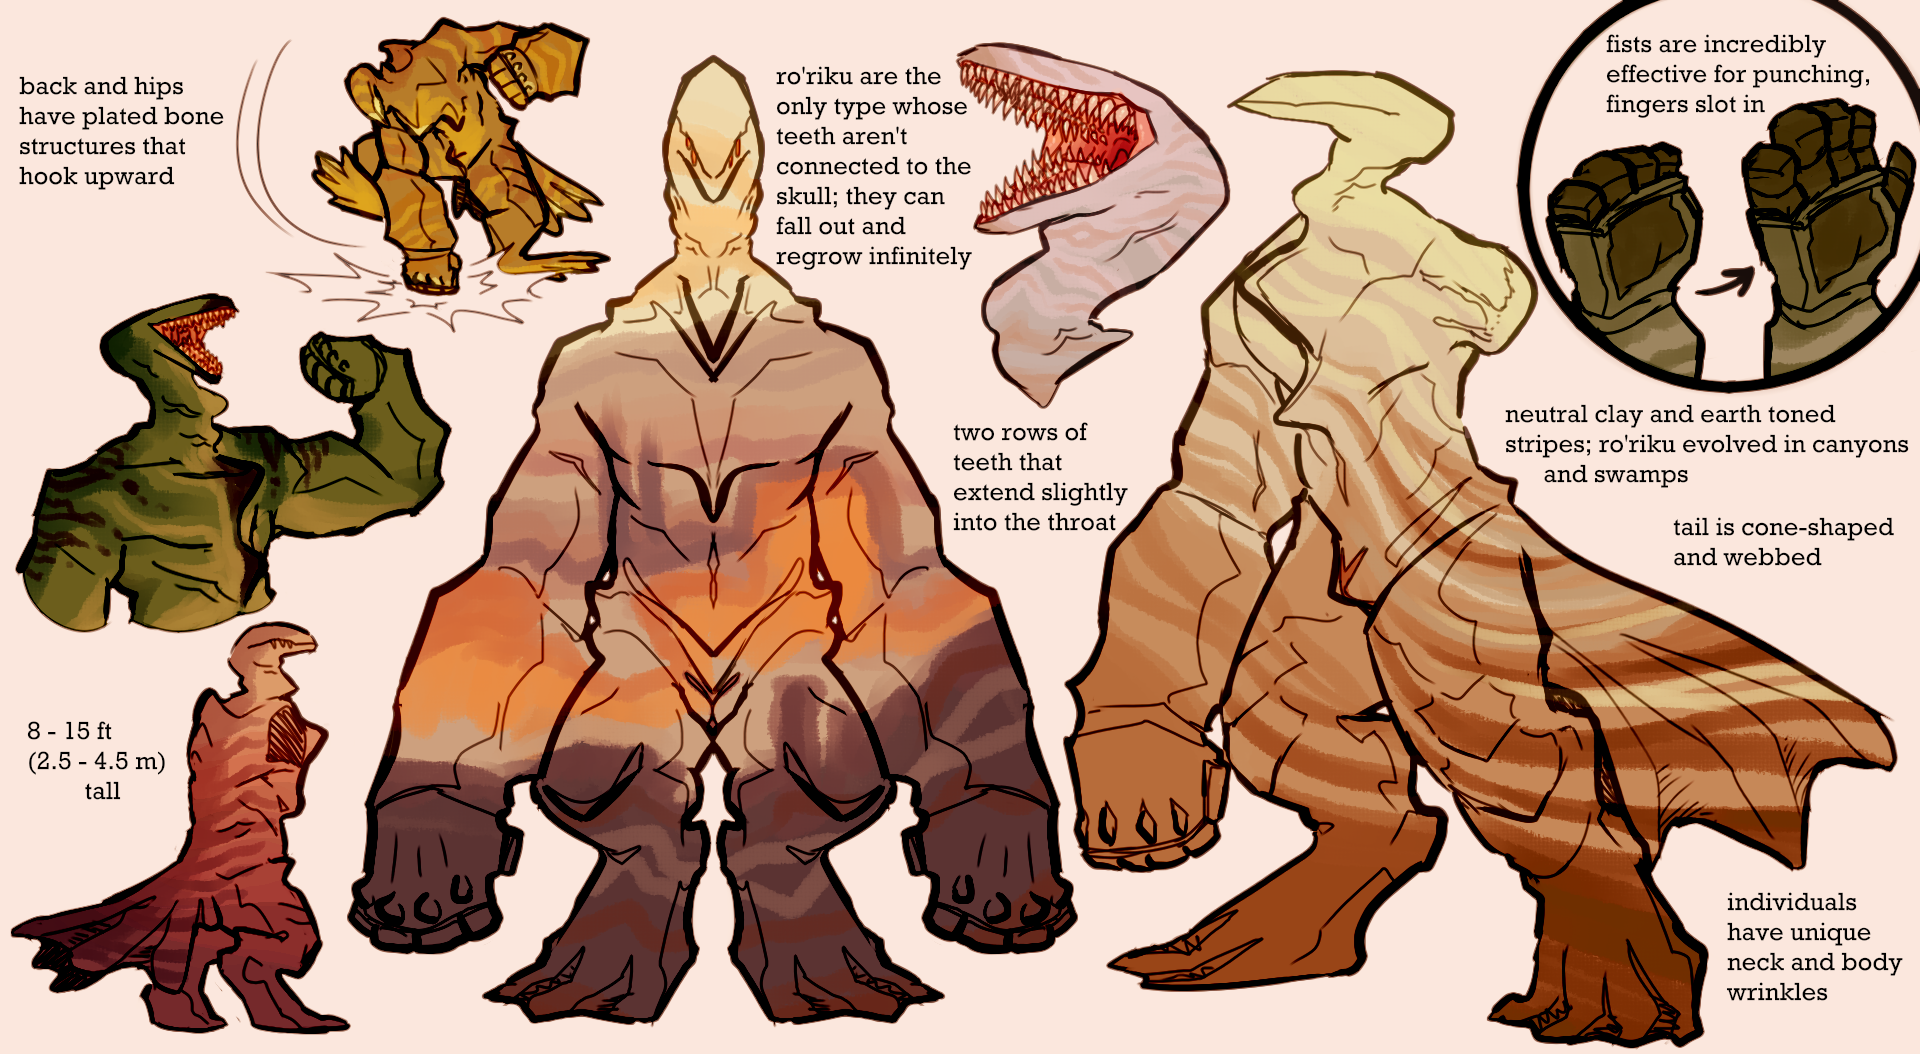 Ro'riku are huge, muscular aliens with large forearms. Back and hips have plated bone structures that hook upward. 8 to 15 feet (2.5 to 4.5 meters) tall. Ro'riku are the only type of Xorryaddan whose teeth aren't connected to the skull; they can fall out and regrew infinitely. Two rows of teeth that extend slightly down into the throat. Fists are incredibly effective for punching, the fingers slot into the hand. Neutral clay and earth toned stripes; ro'riku initially evolved in canyons and swamps. Tail is cone-shaped and webbed. Individuals have unique neck and body wrinkles.